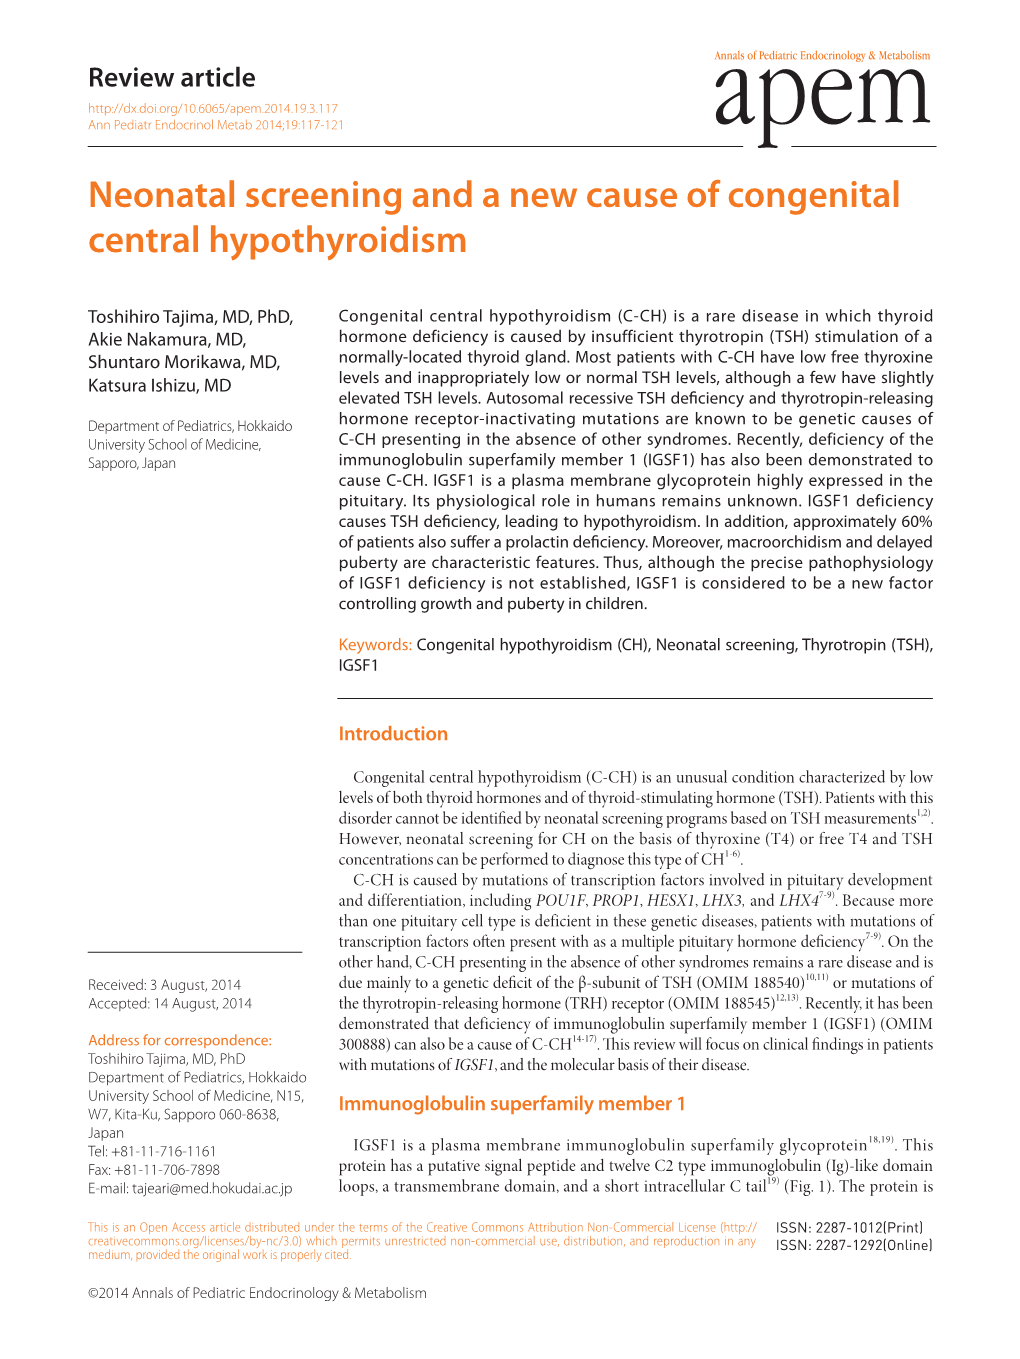 Neonatal Screening and a New Cause of Congenital Central Hypothyroidism